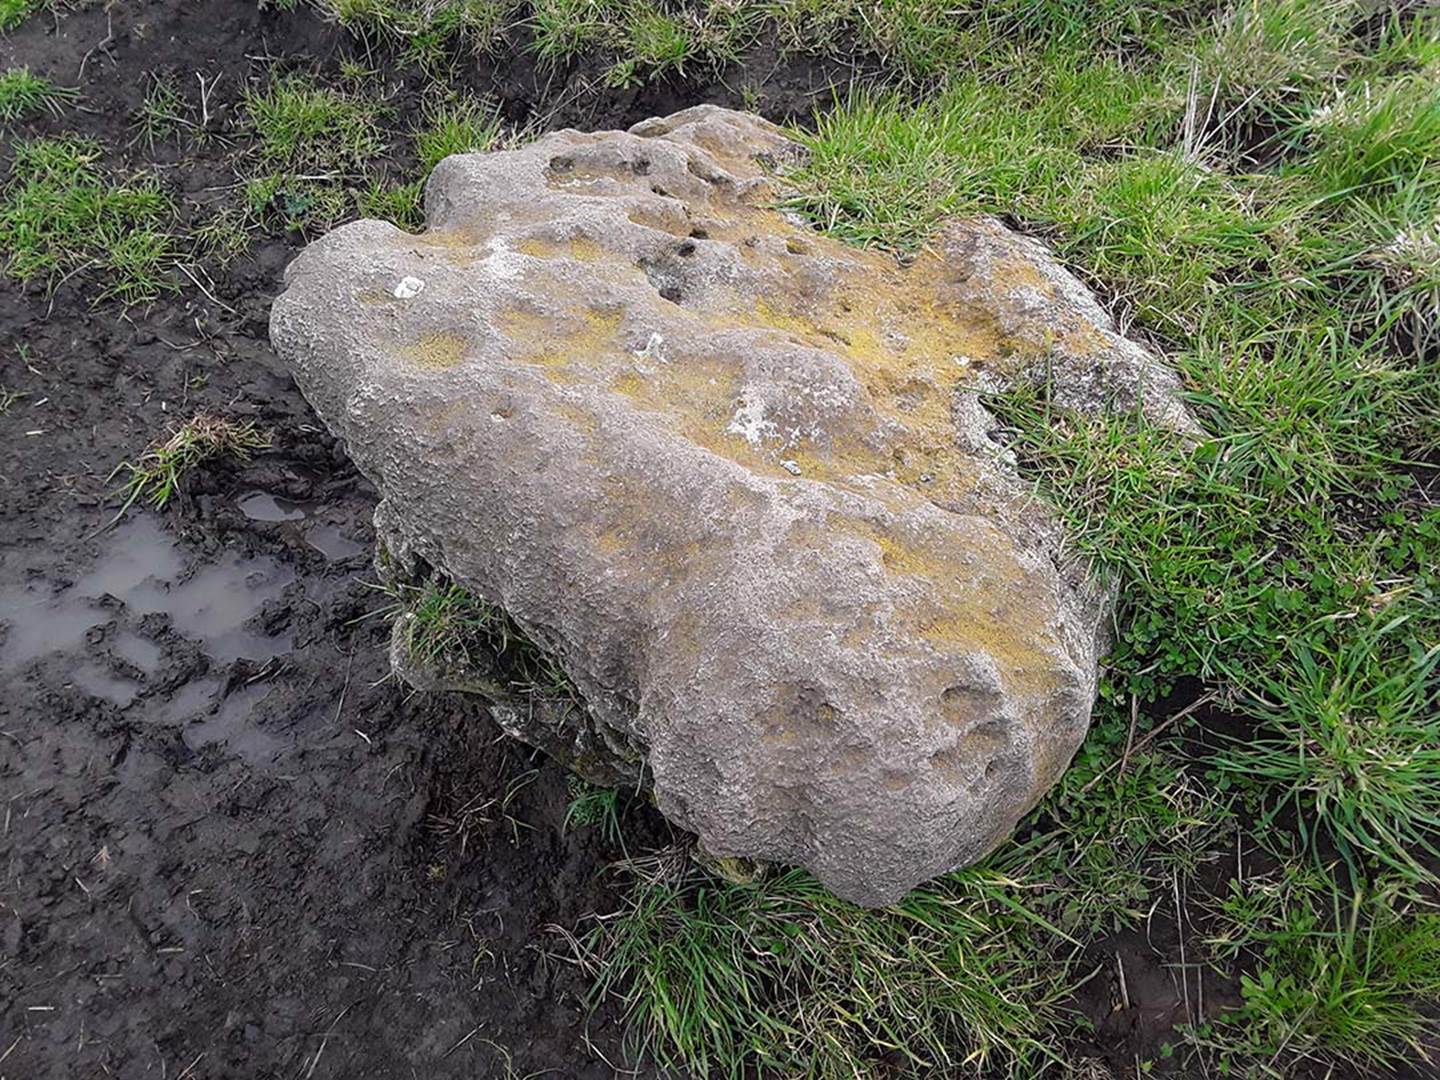 A close up of a rock

Description automatically generated